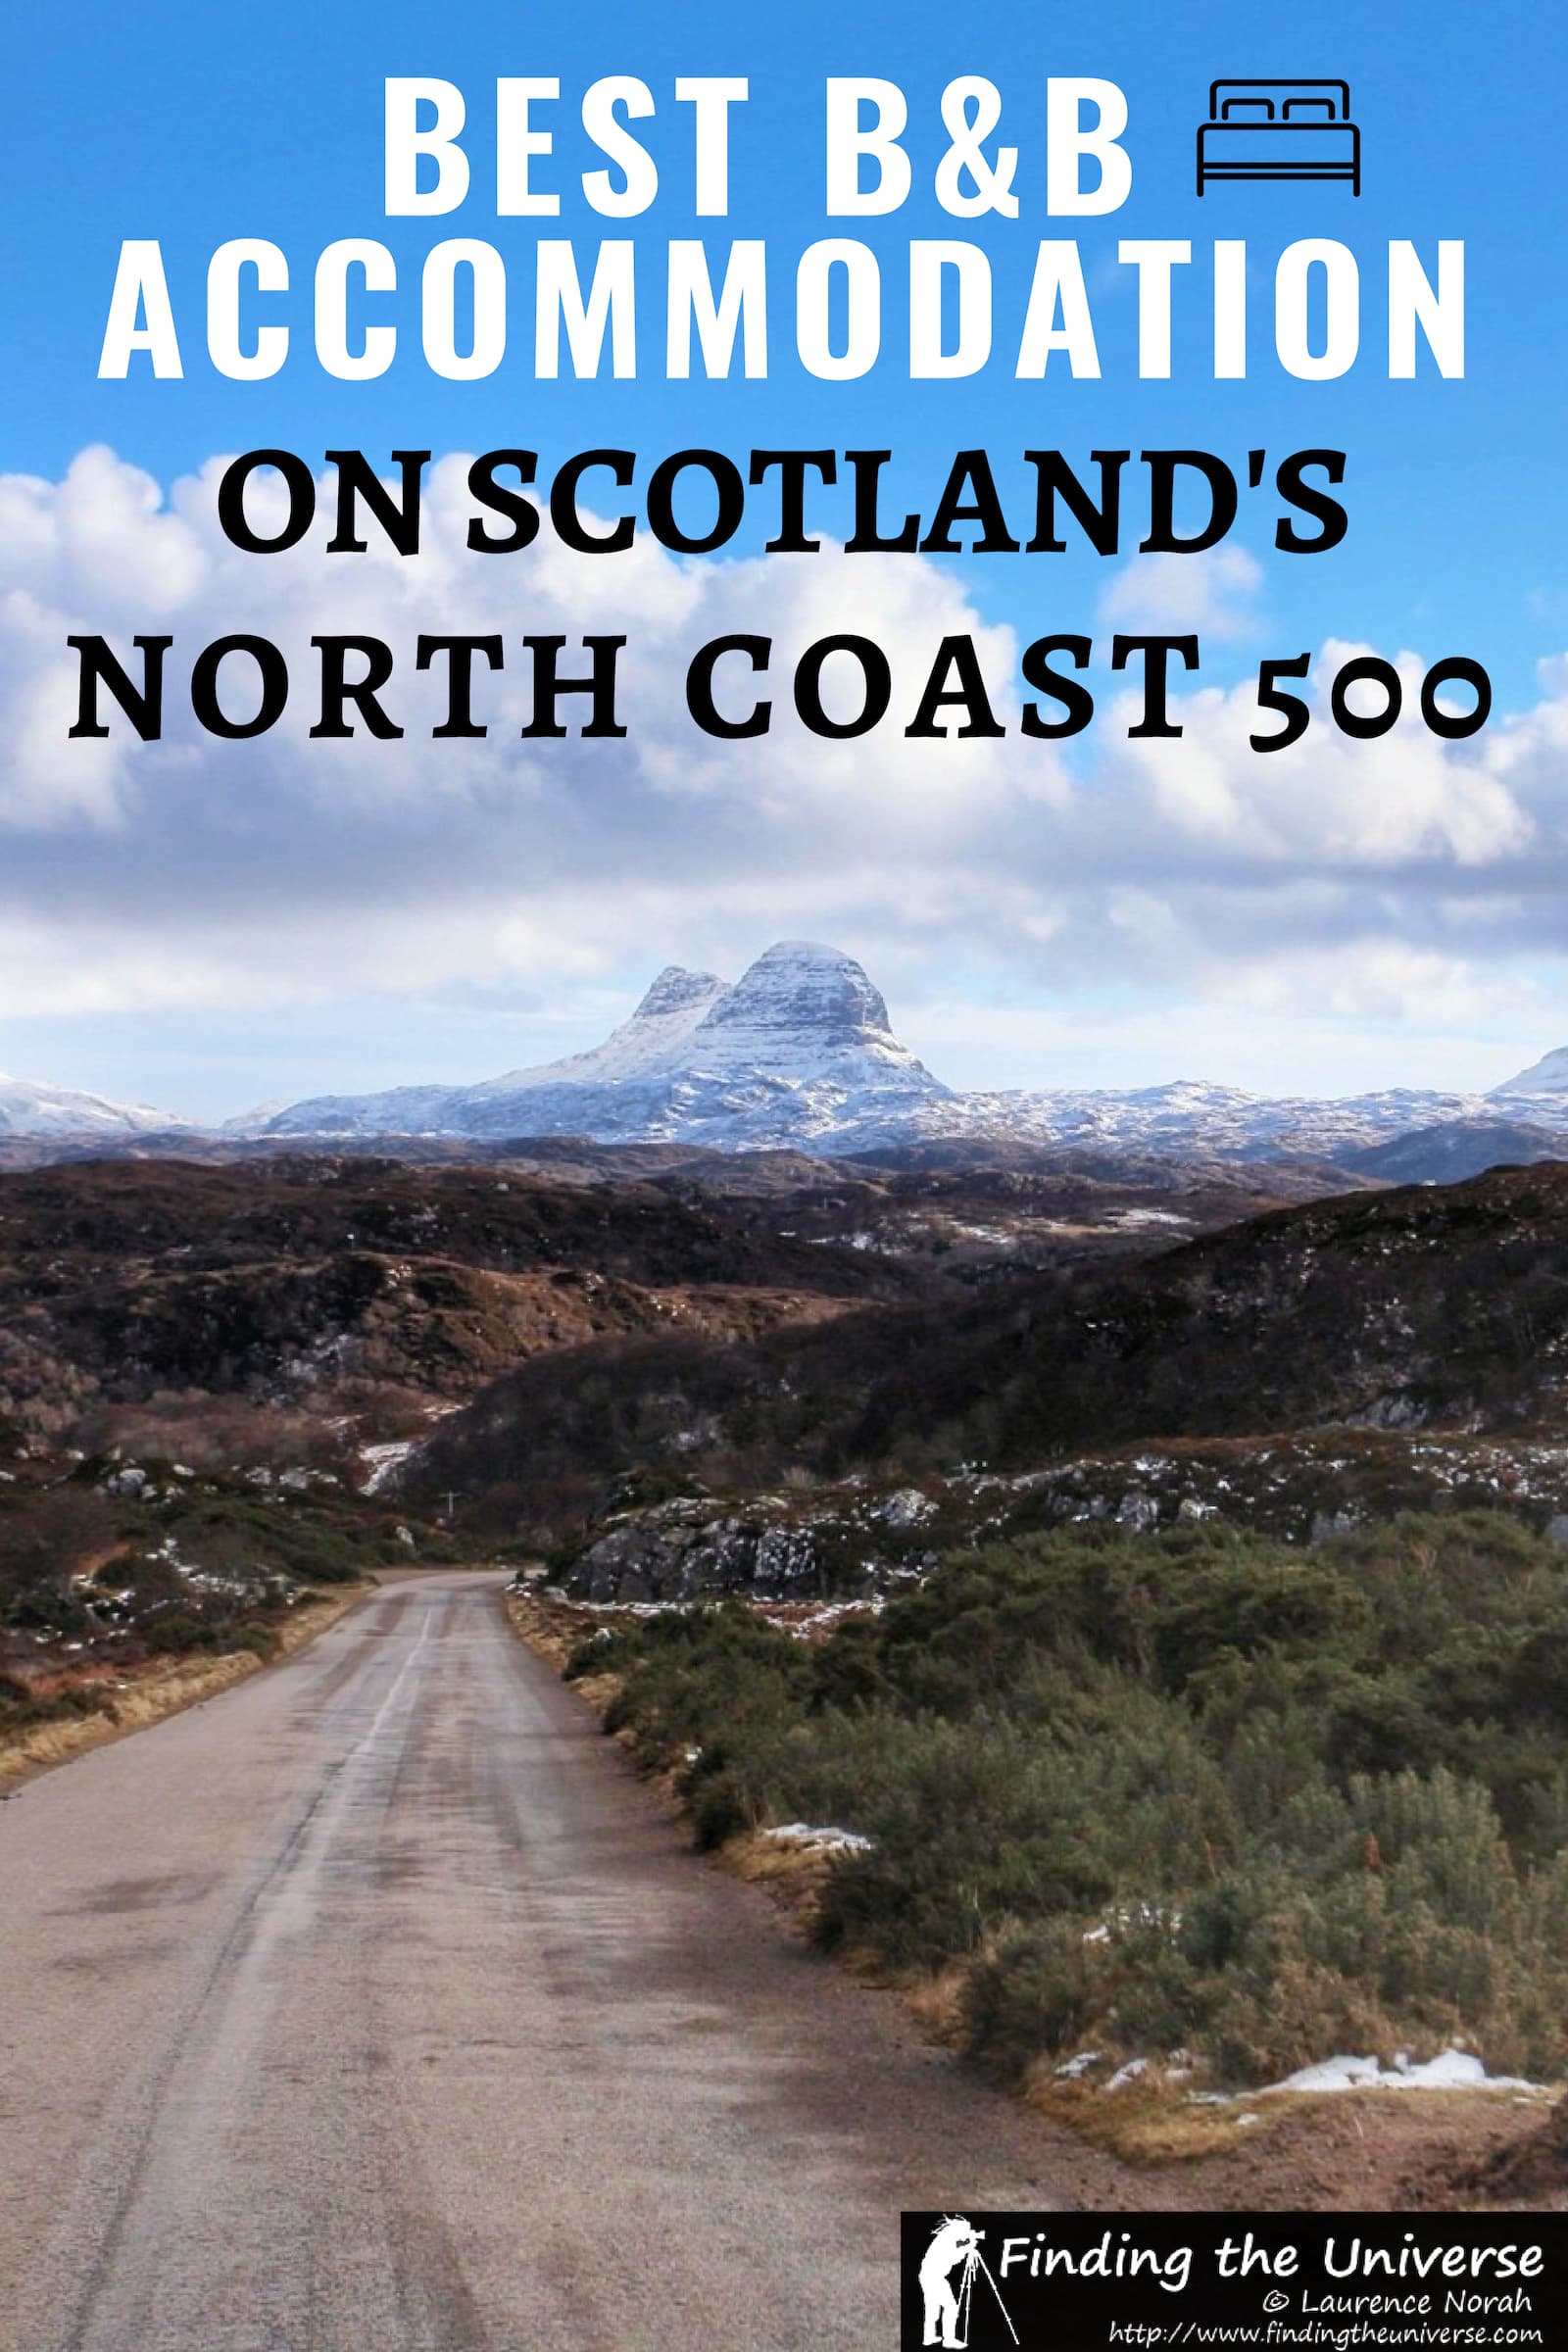 Our guide to the best bed and breakfast accommodation options on the North Coast 500, with properties all along the route